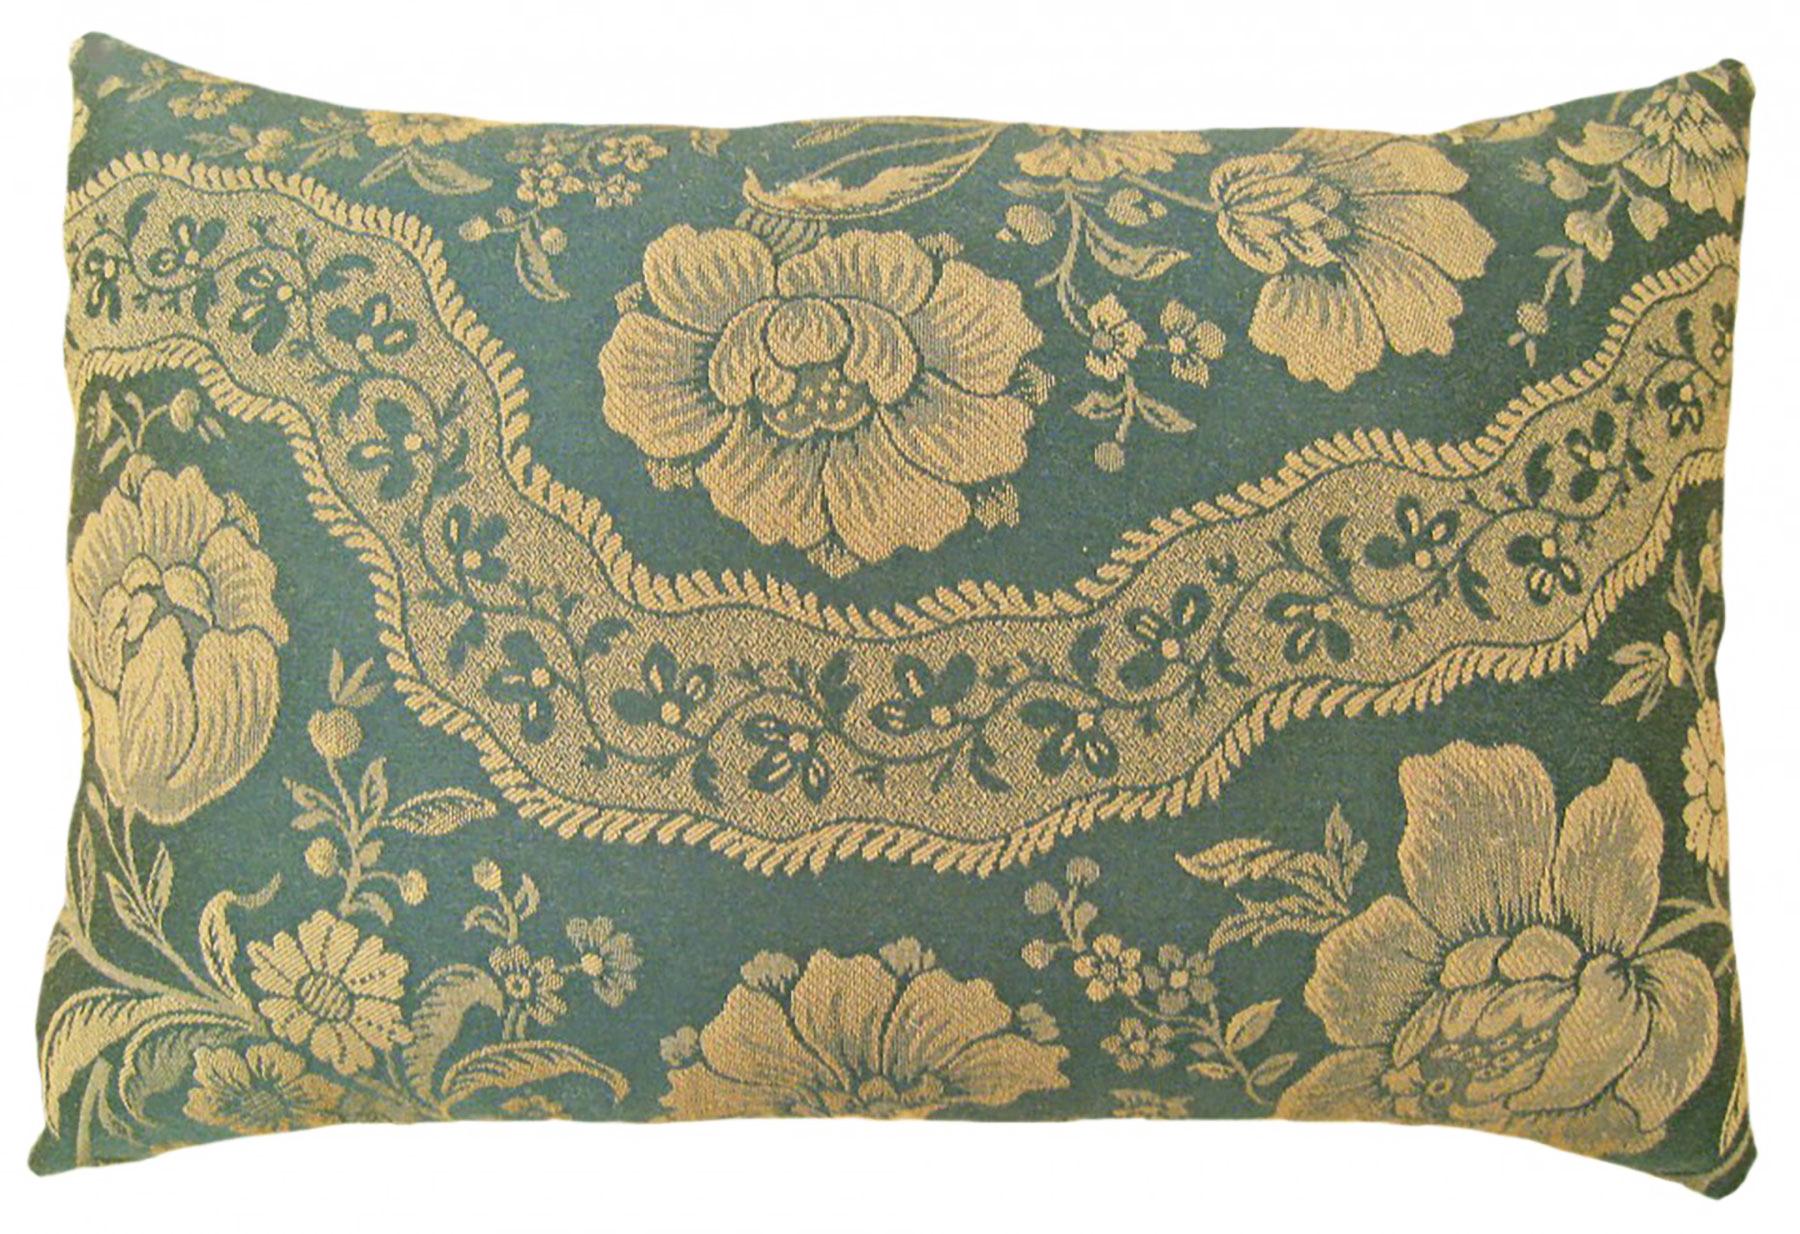 Decorative Vintage Pillow with Floral Chinoiserie  For Sale